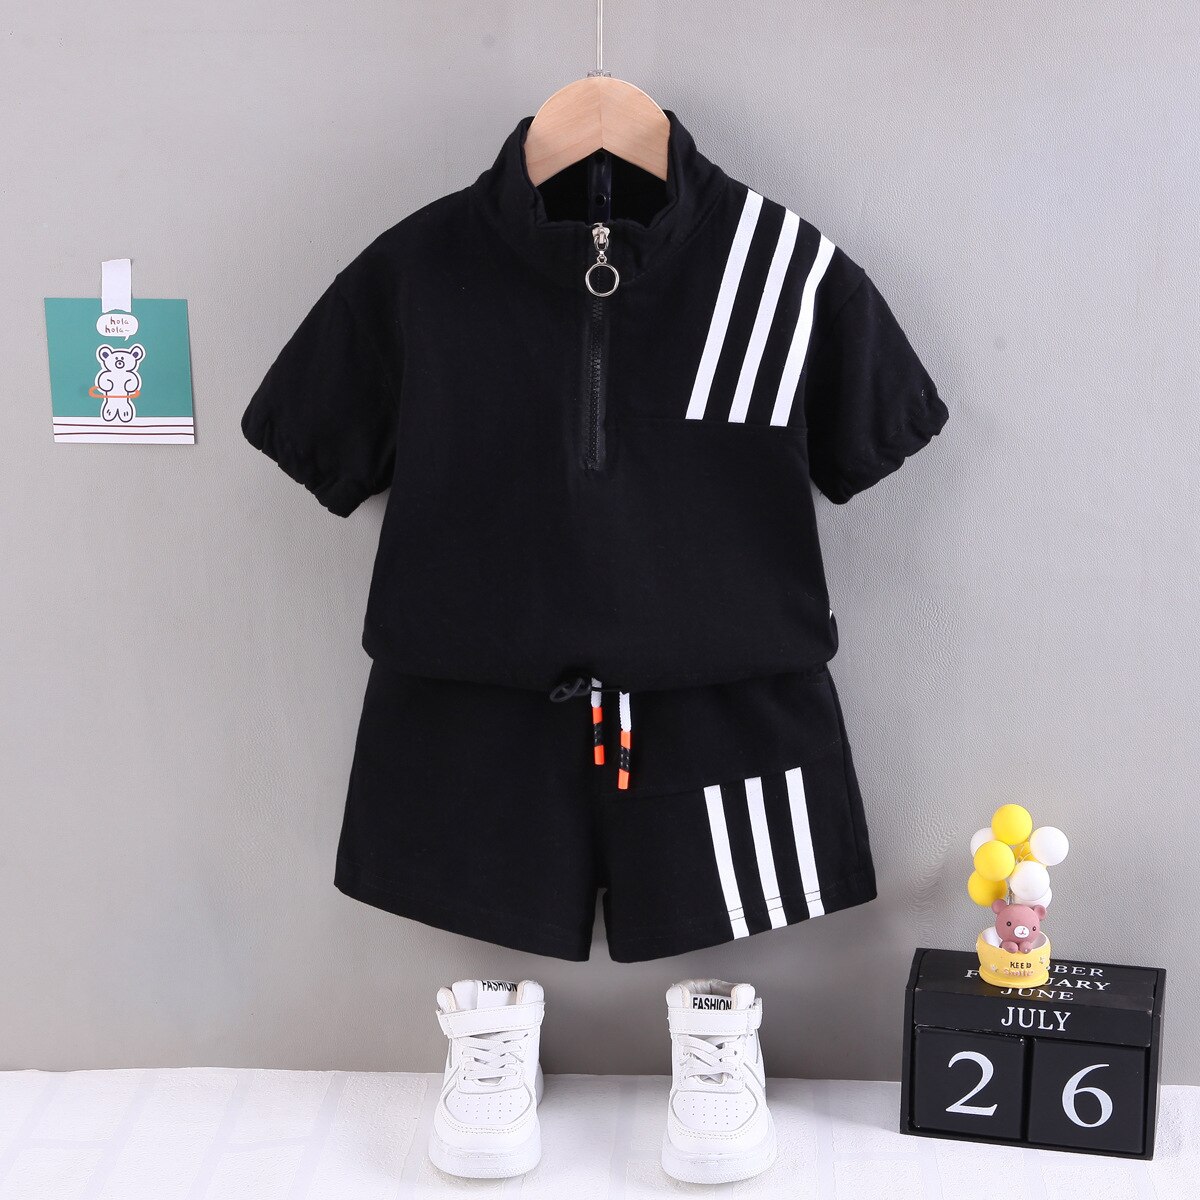 Baby-Boy-Summer-Clothes-12-to-18-Months-Shot-Sleeved-T-shirts-Tops-and-Shorts-Two-3